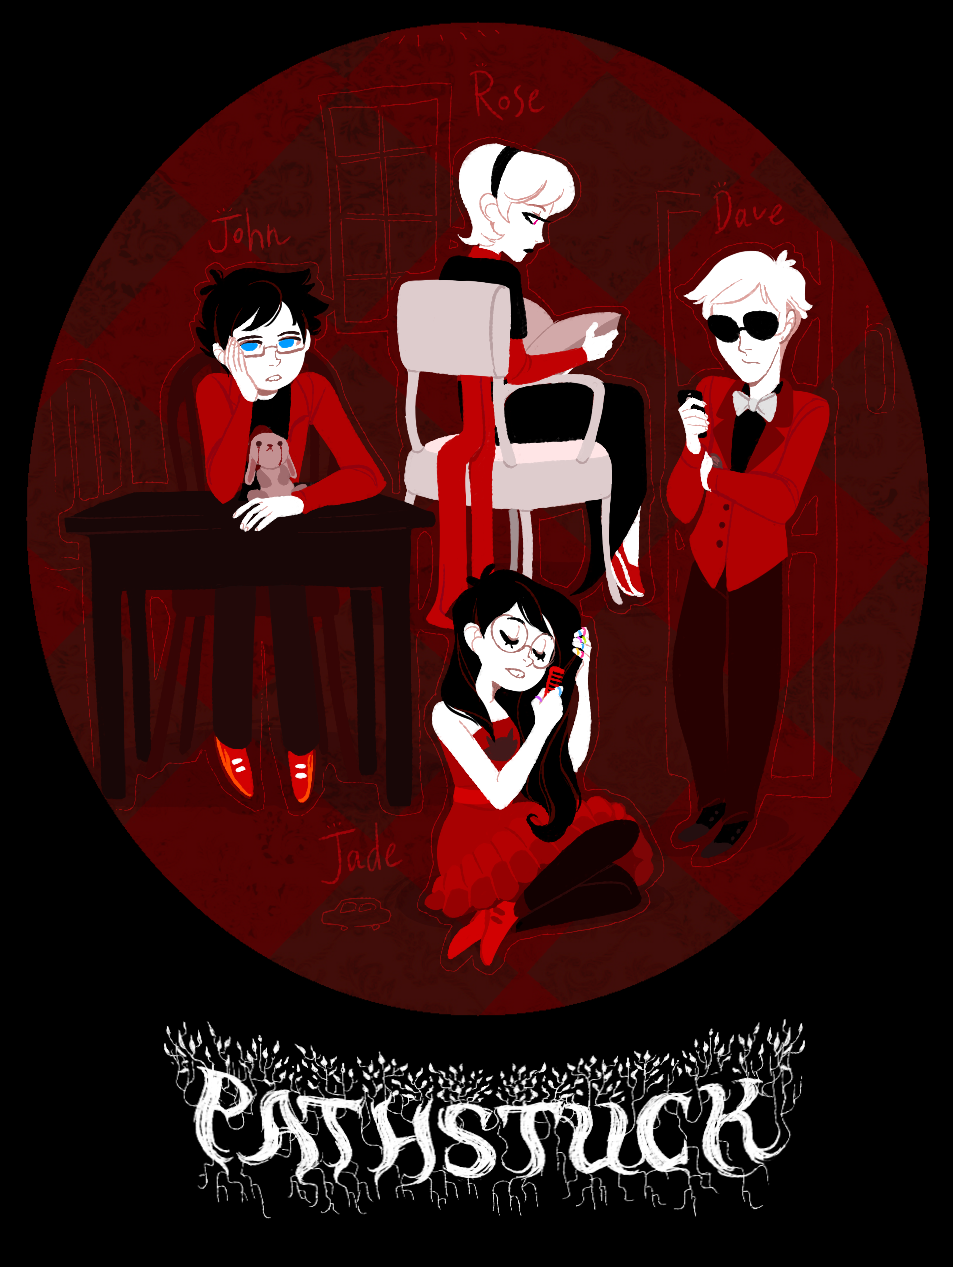 beta_kids black_squiddle_dress book crossover dave_strider dress_of_eclectica jade_harley john's_vriska_outfit john_egbert limited_palette red_plush_puppet_tux rose_lalonde styling_hair the_path xamag